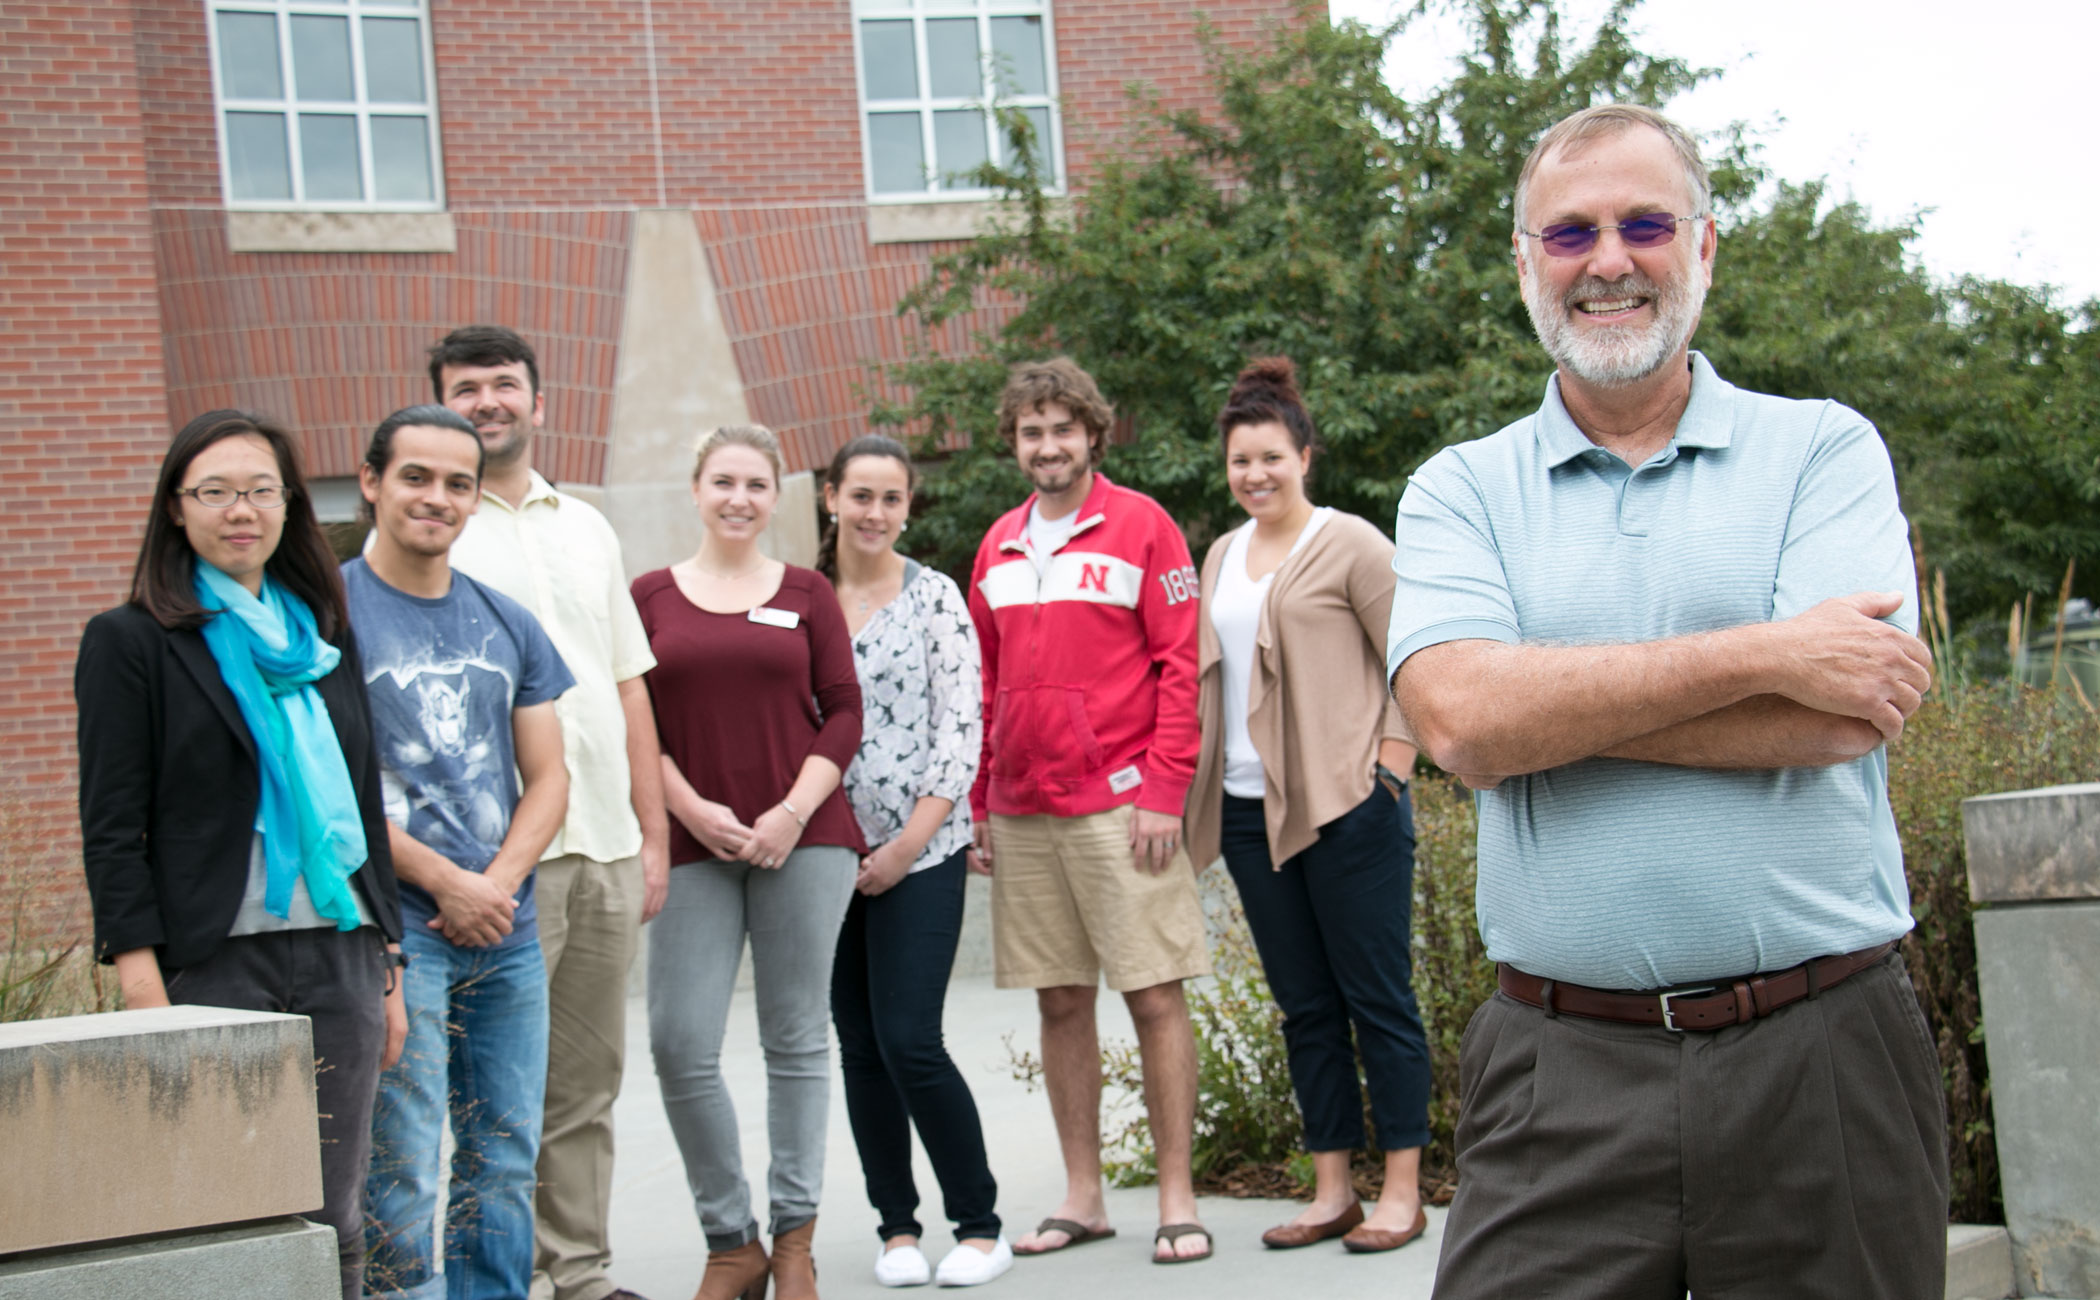 Michael Scheel, right, with graduate students from the Building Bridges Program.